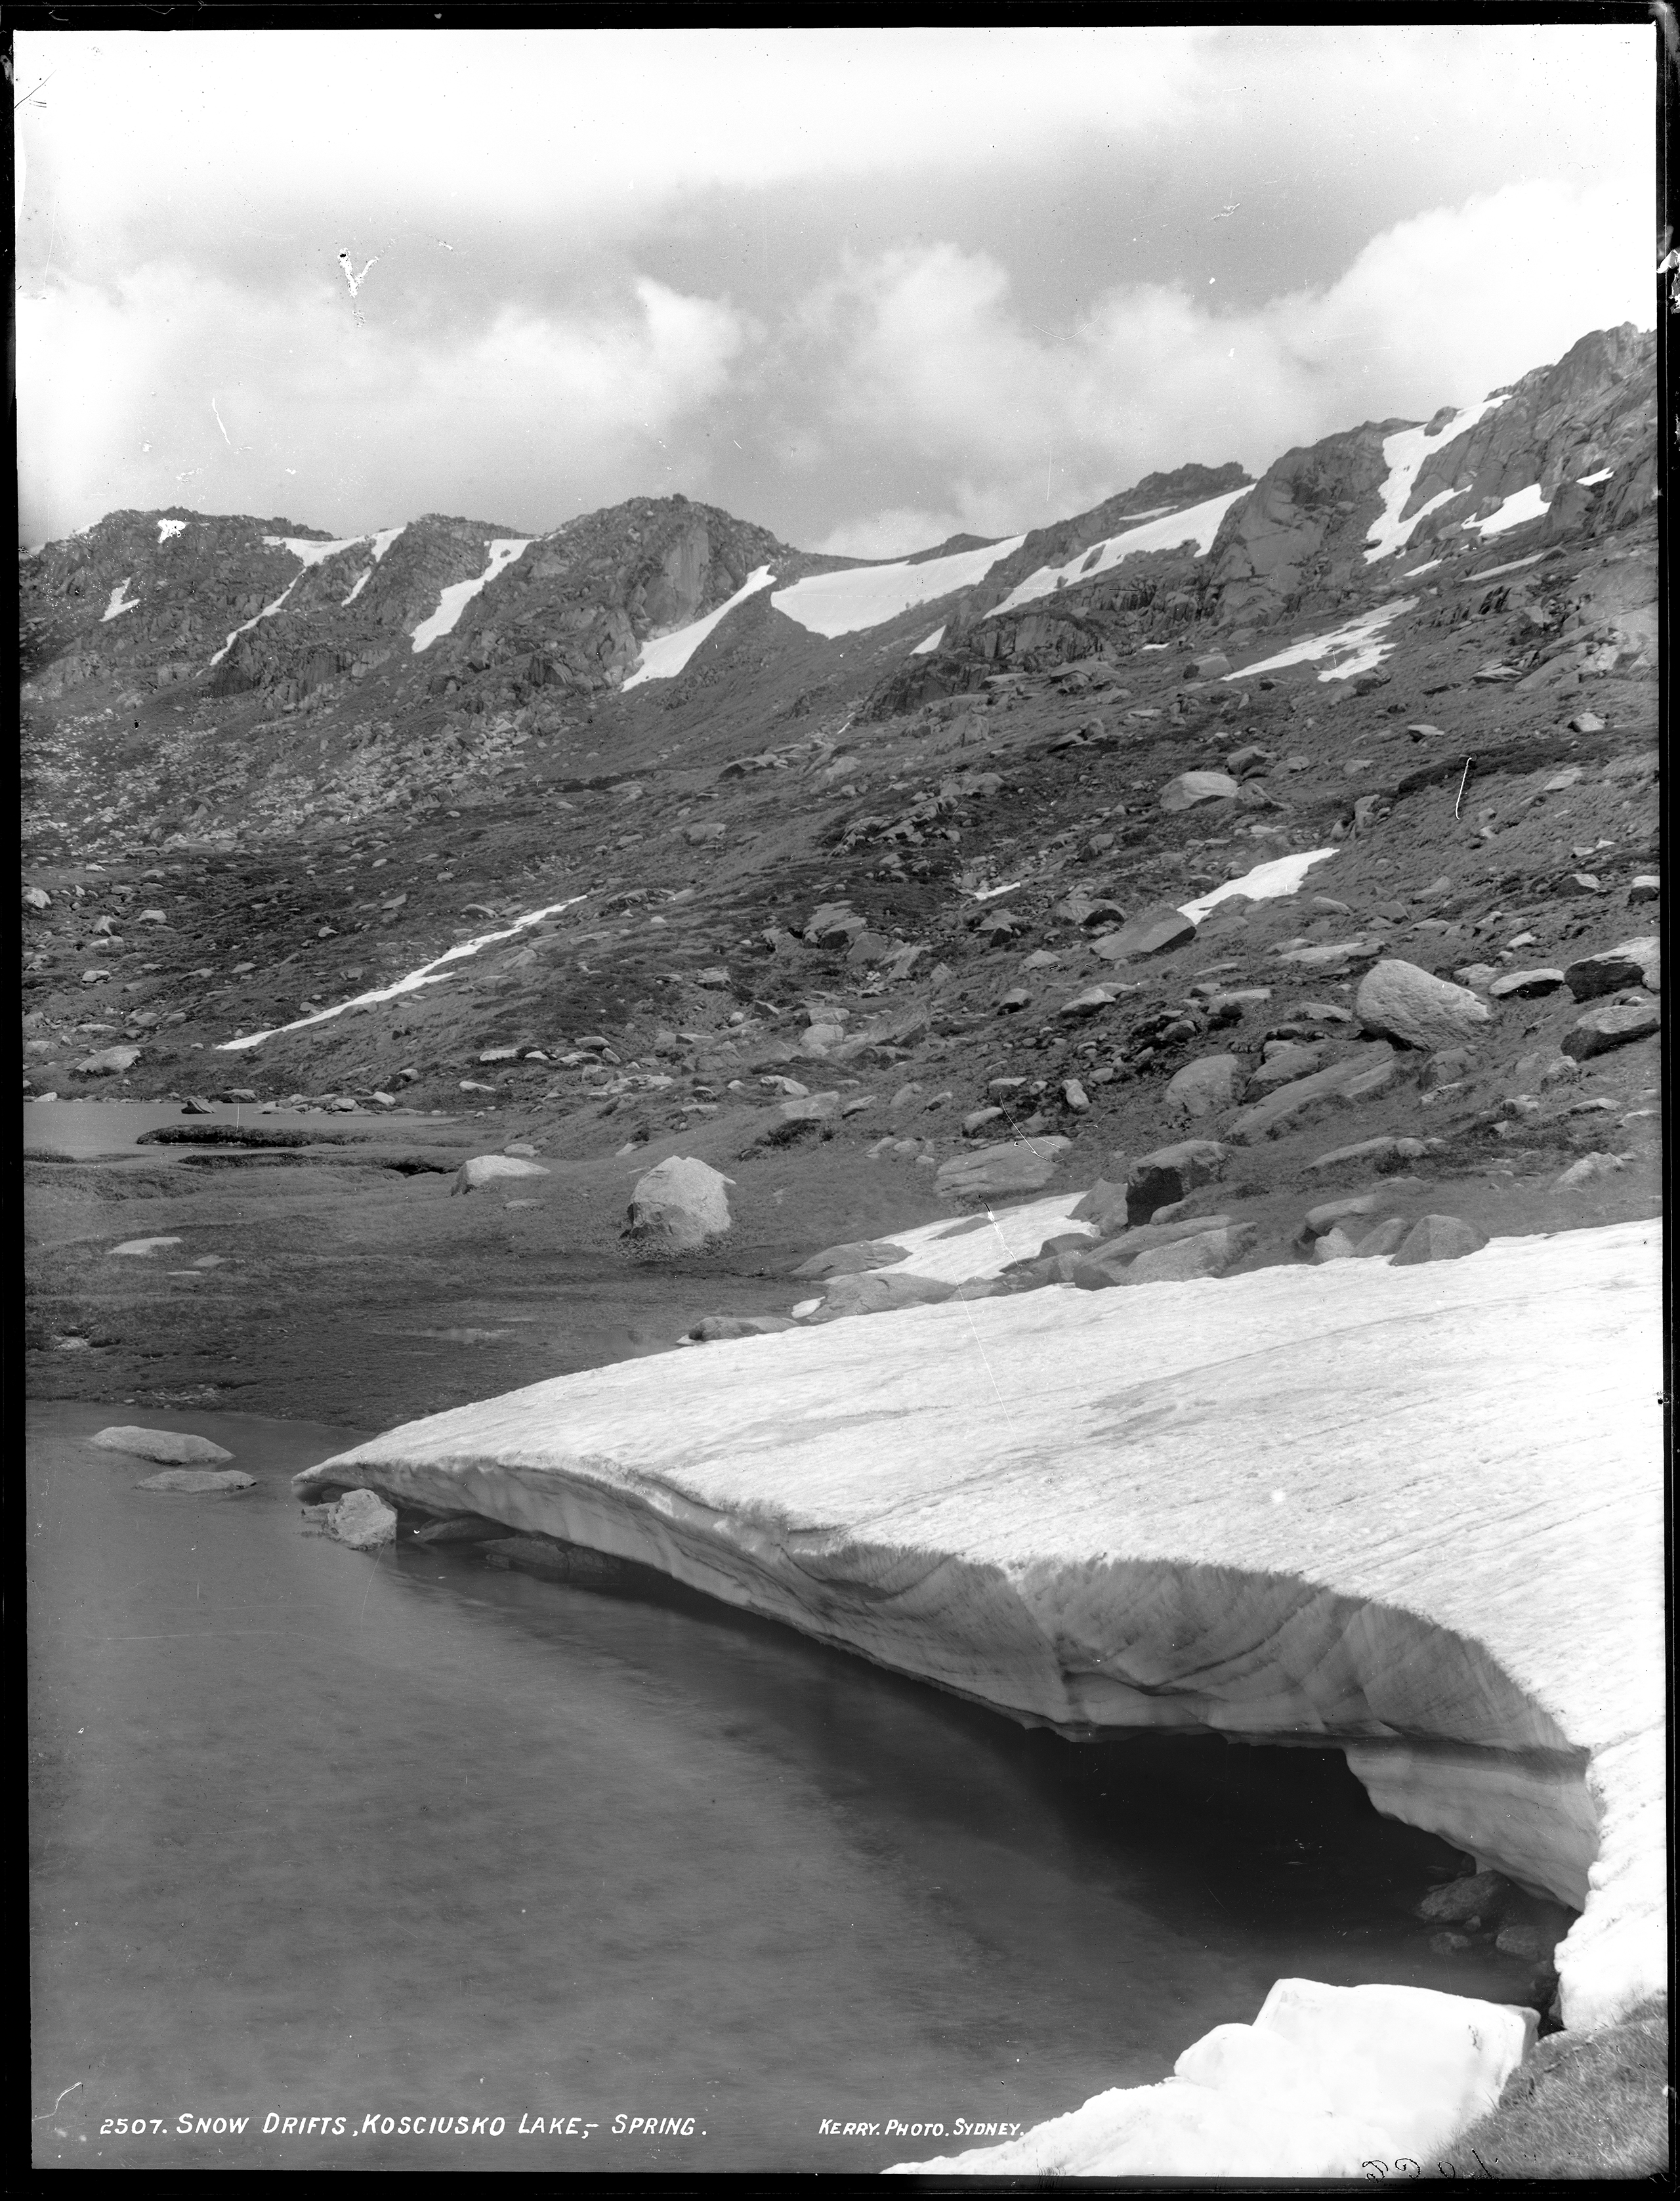 'Snow Drifts, Kosciuszko Lake, Spring' by Kerry and Co